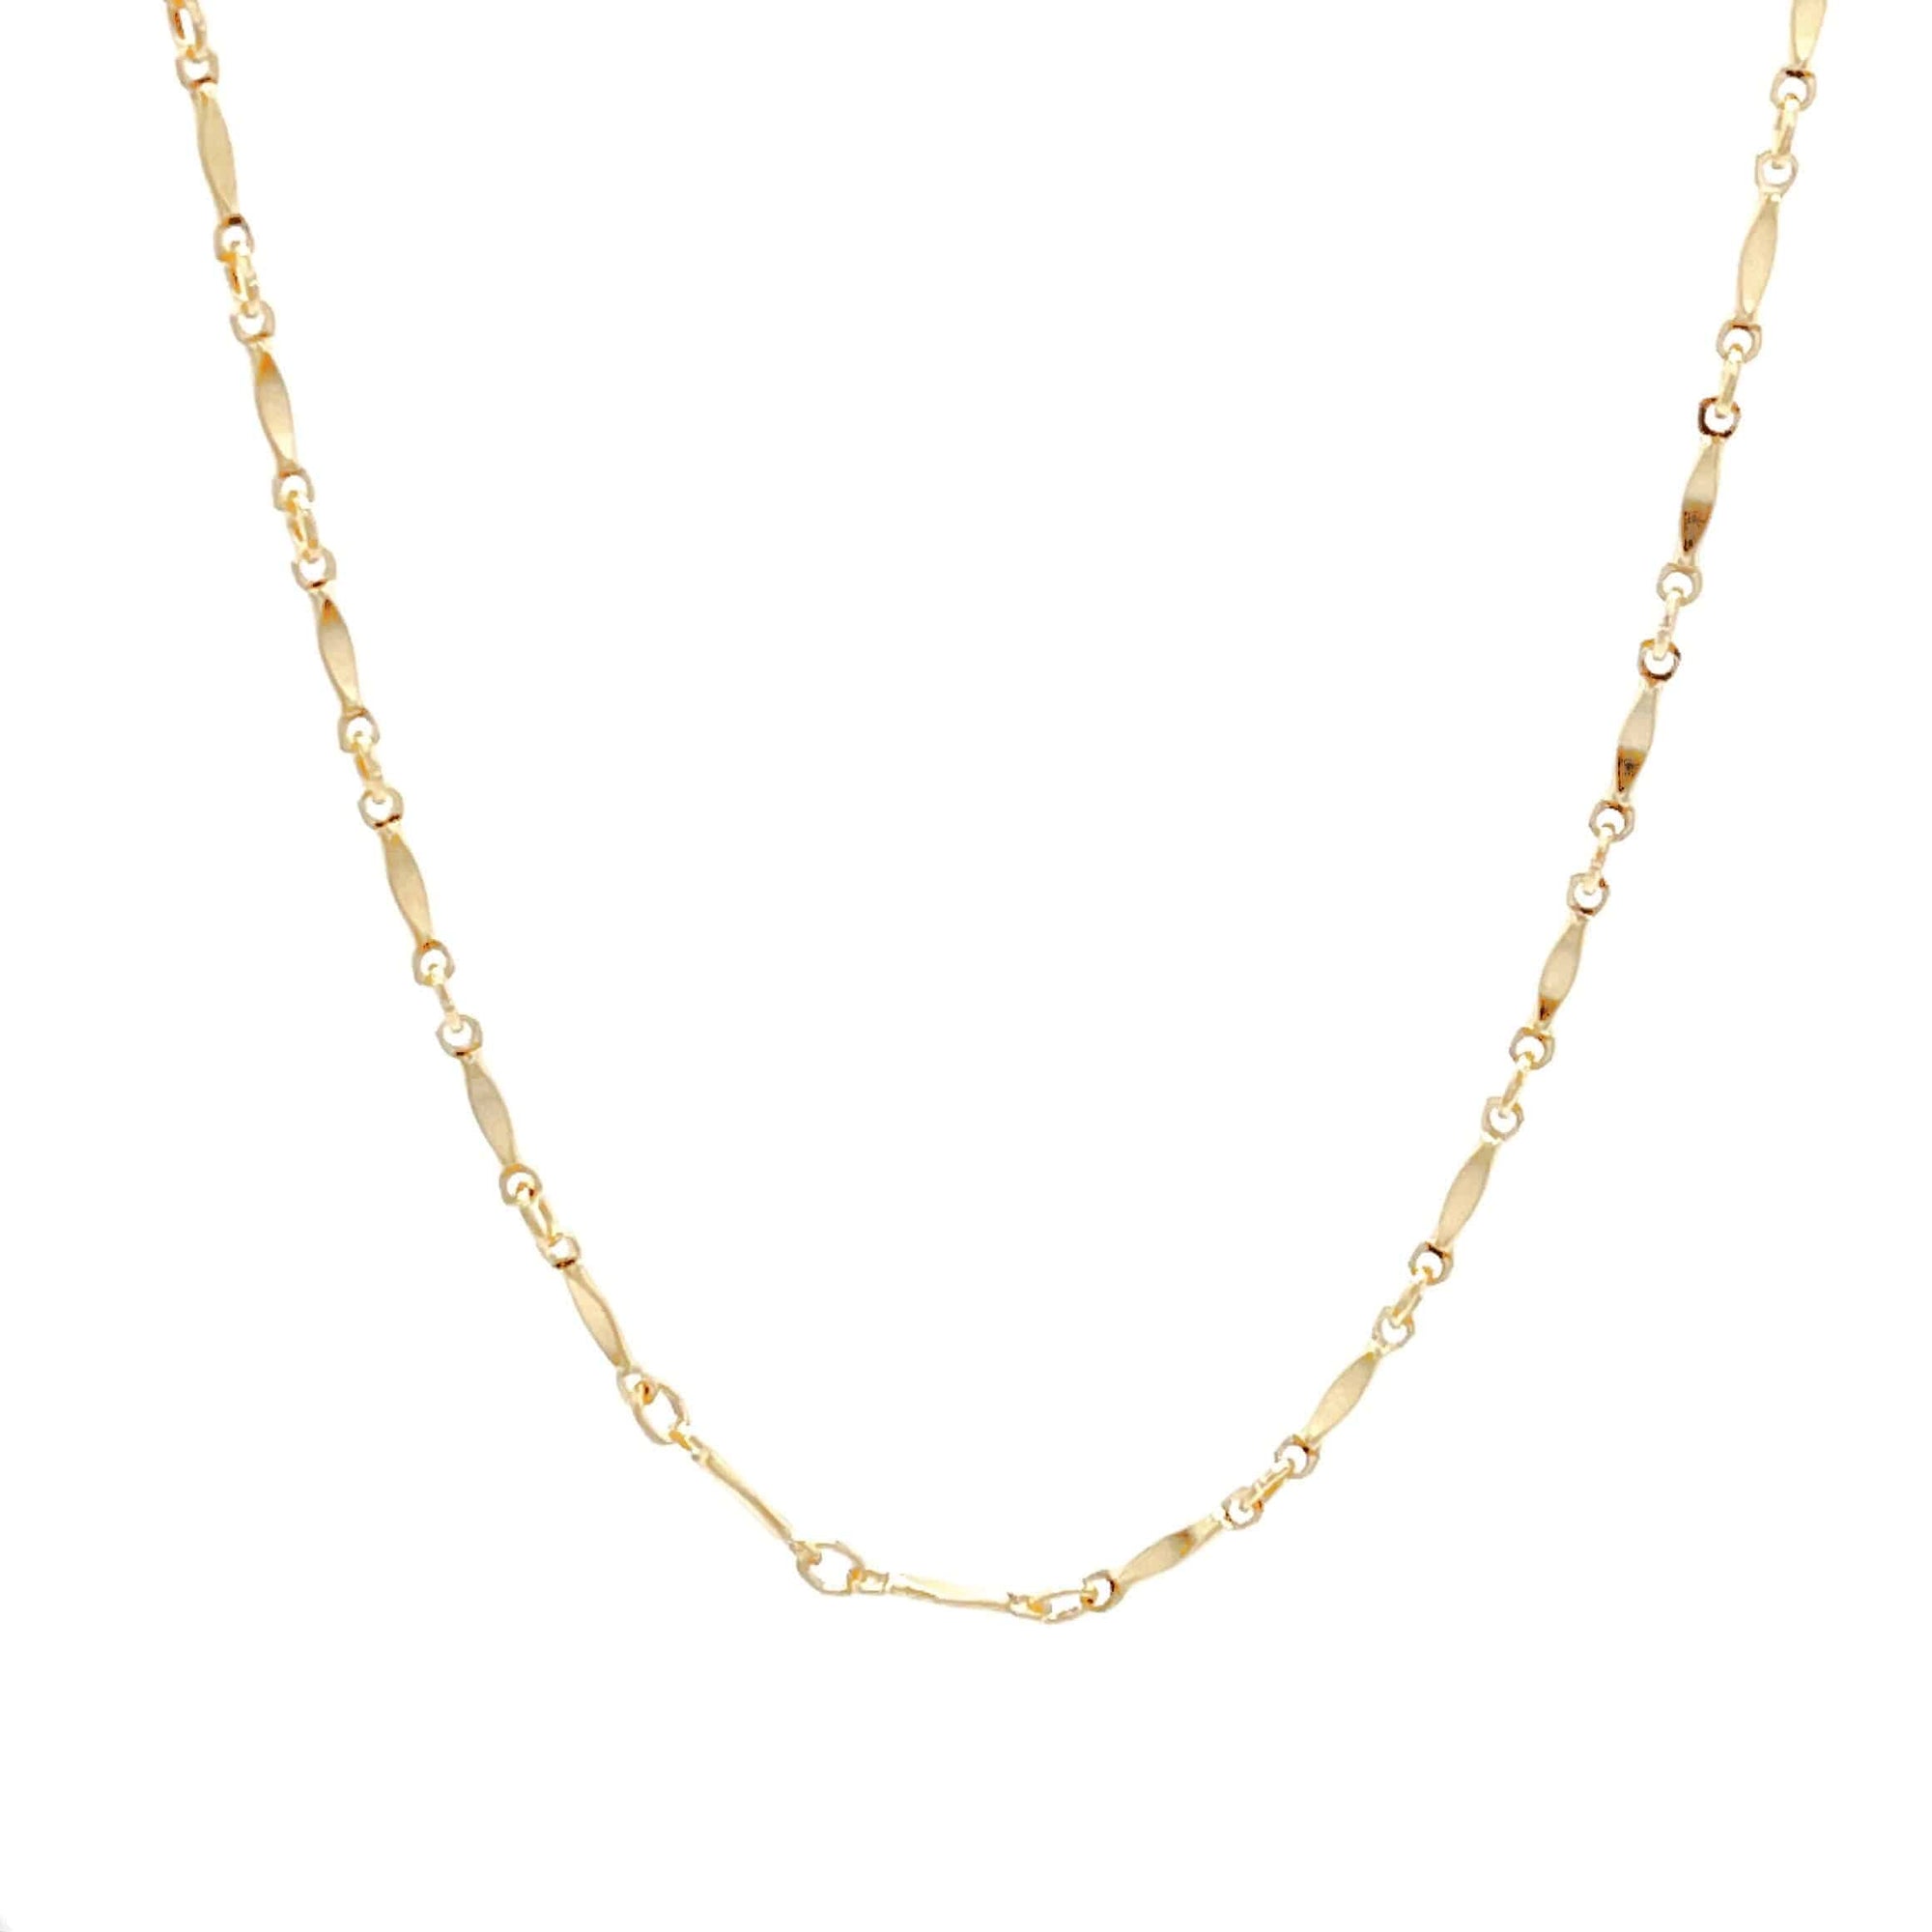 Dainty Bar Chain Layering Necklace w/ 2" Built-In Extender - Gold - The Preppy Bunny